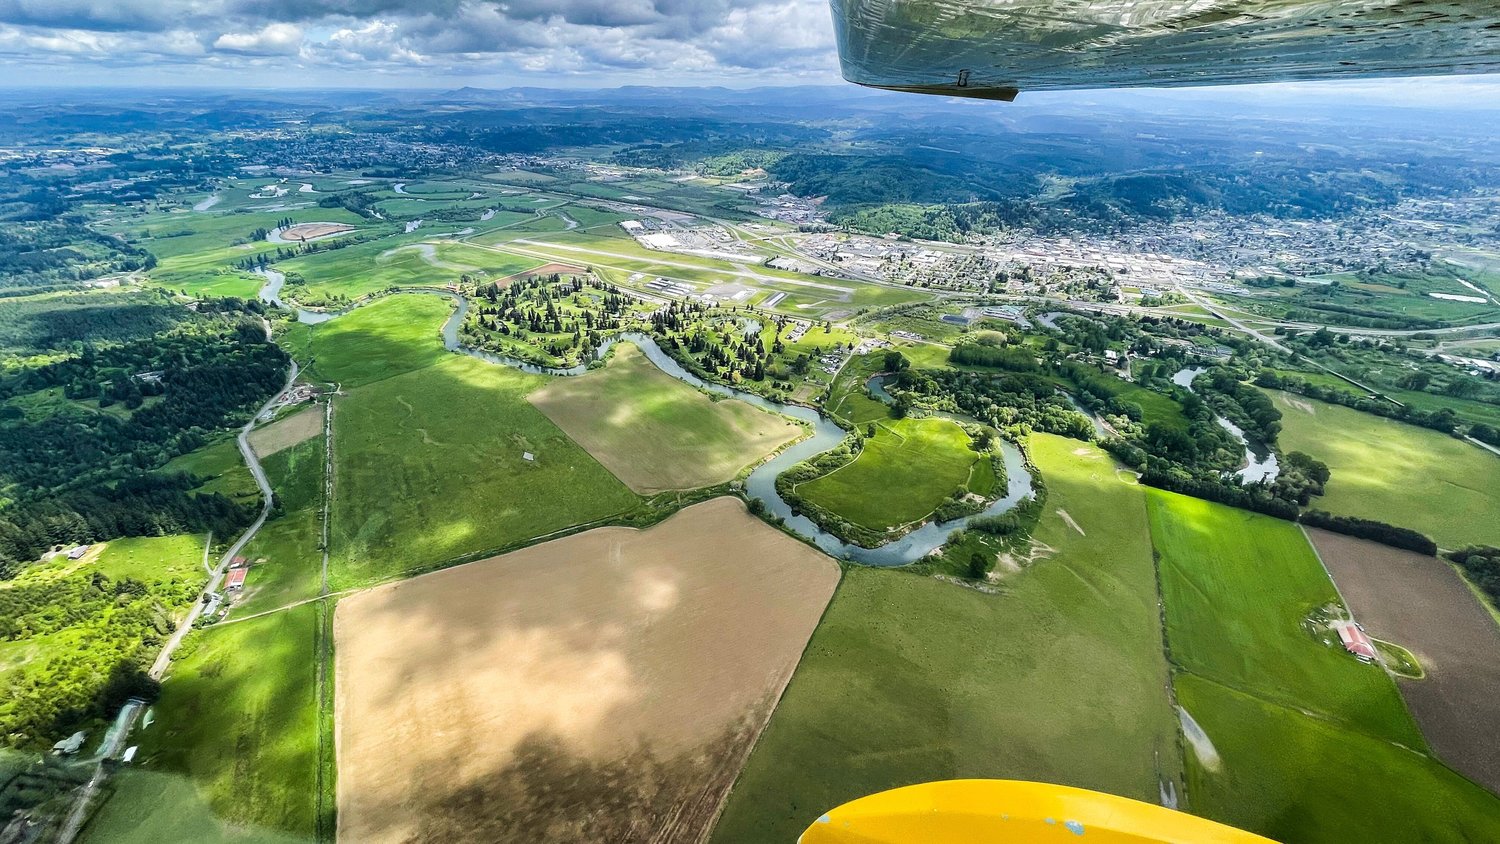 The Chehalis River winds alongside the Twin Cities seen from above on a Friday flight.